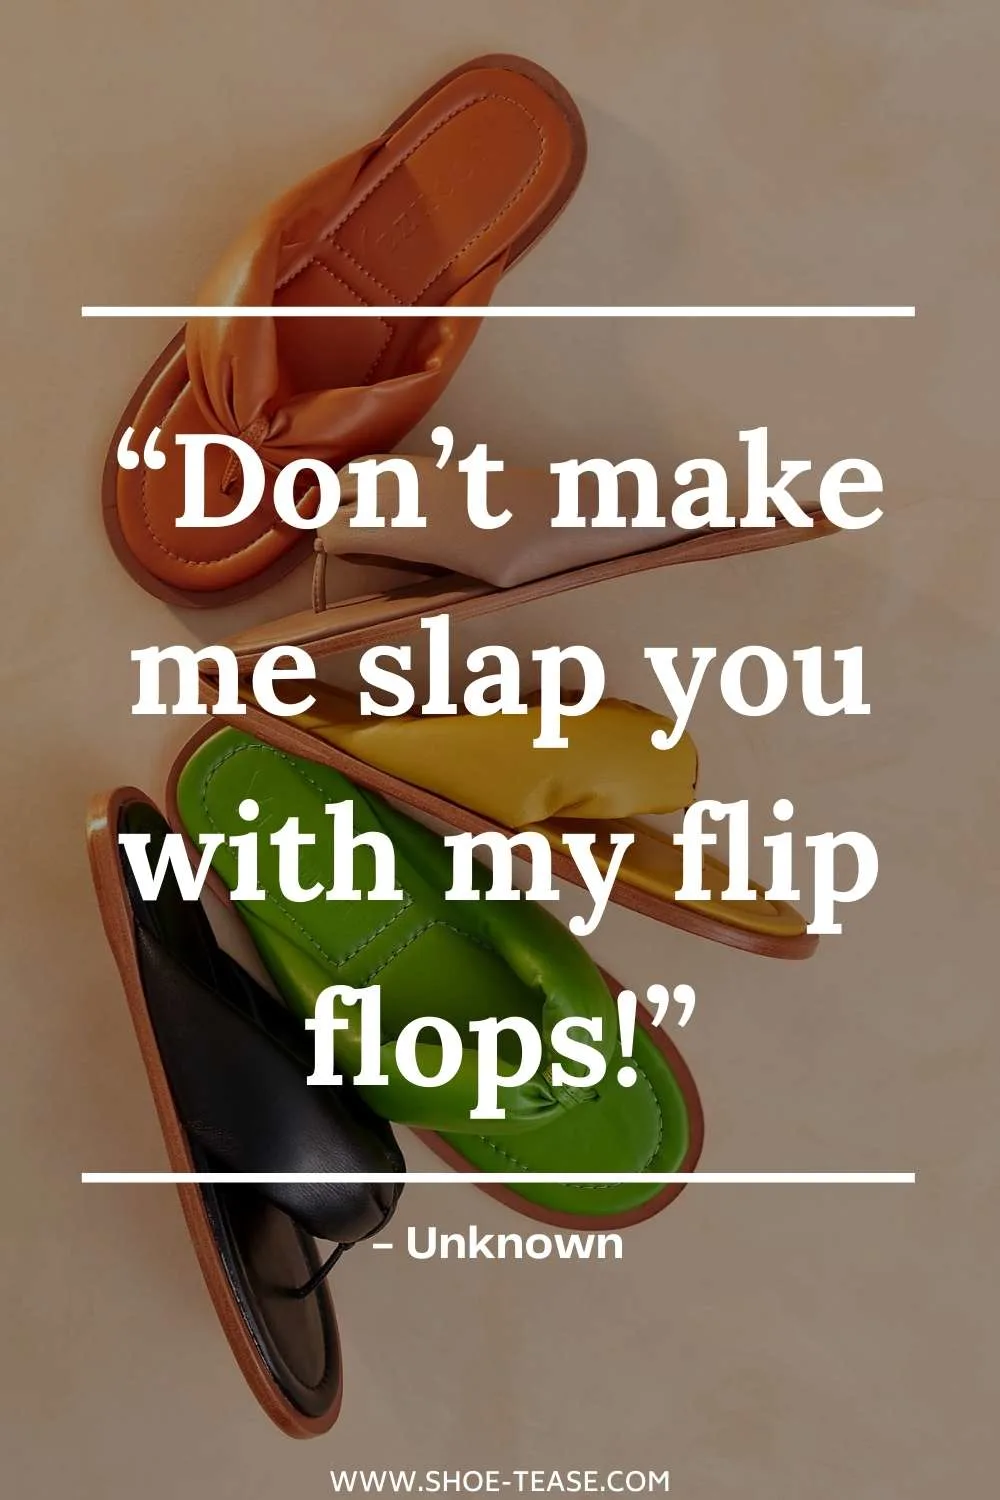 Flip flop quote reading don't make me slap you with my flip flops over image of colorful flip flops in a half circle.